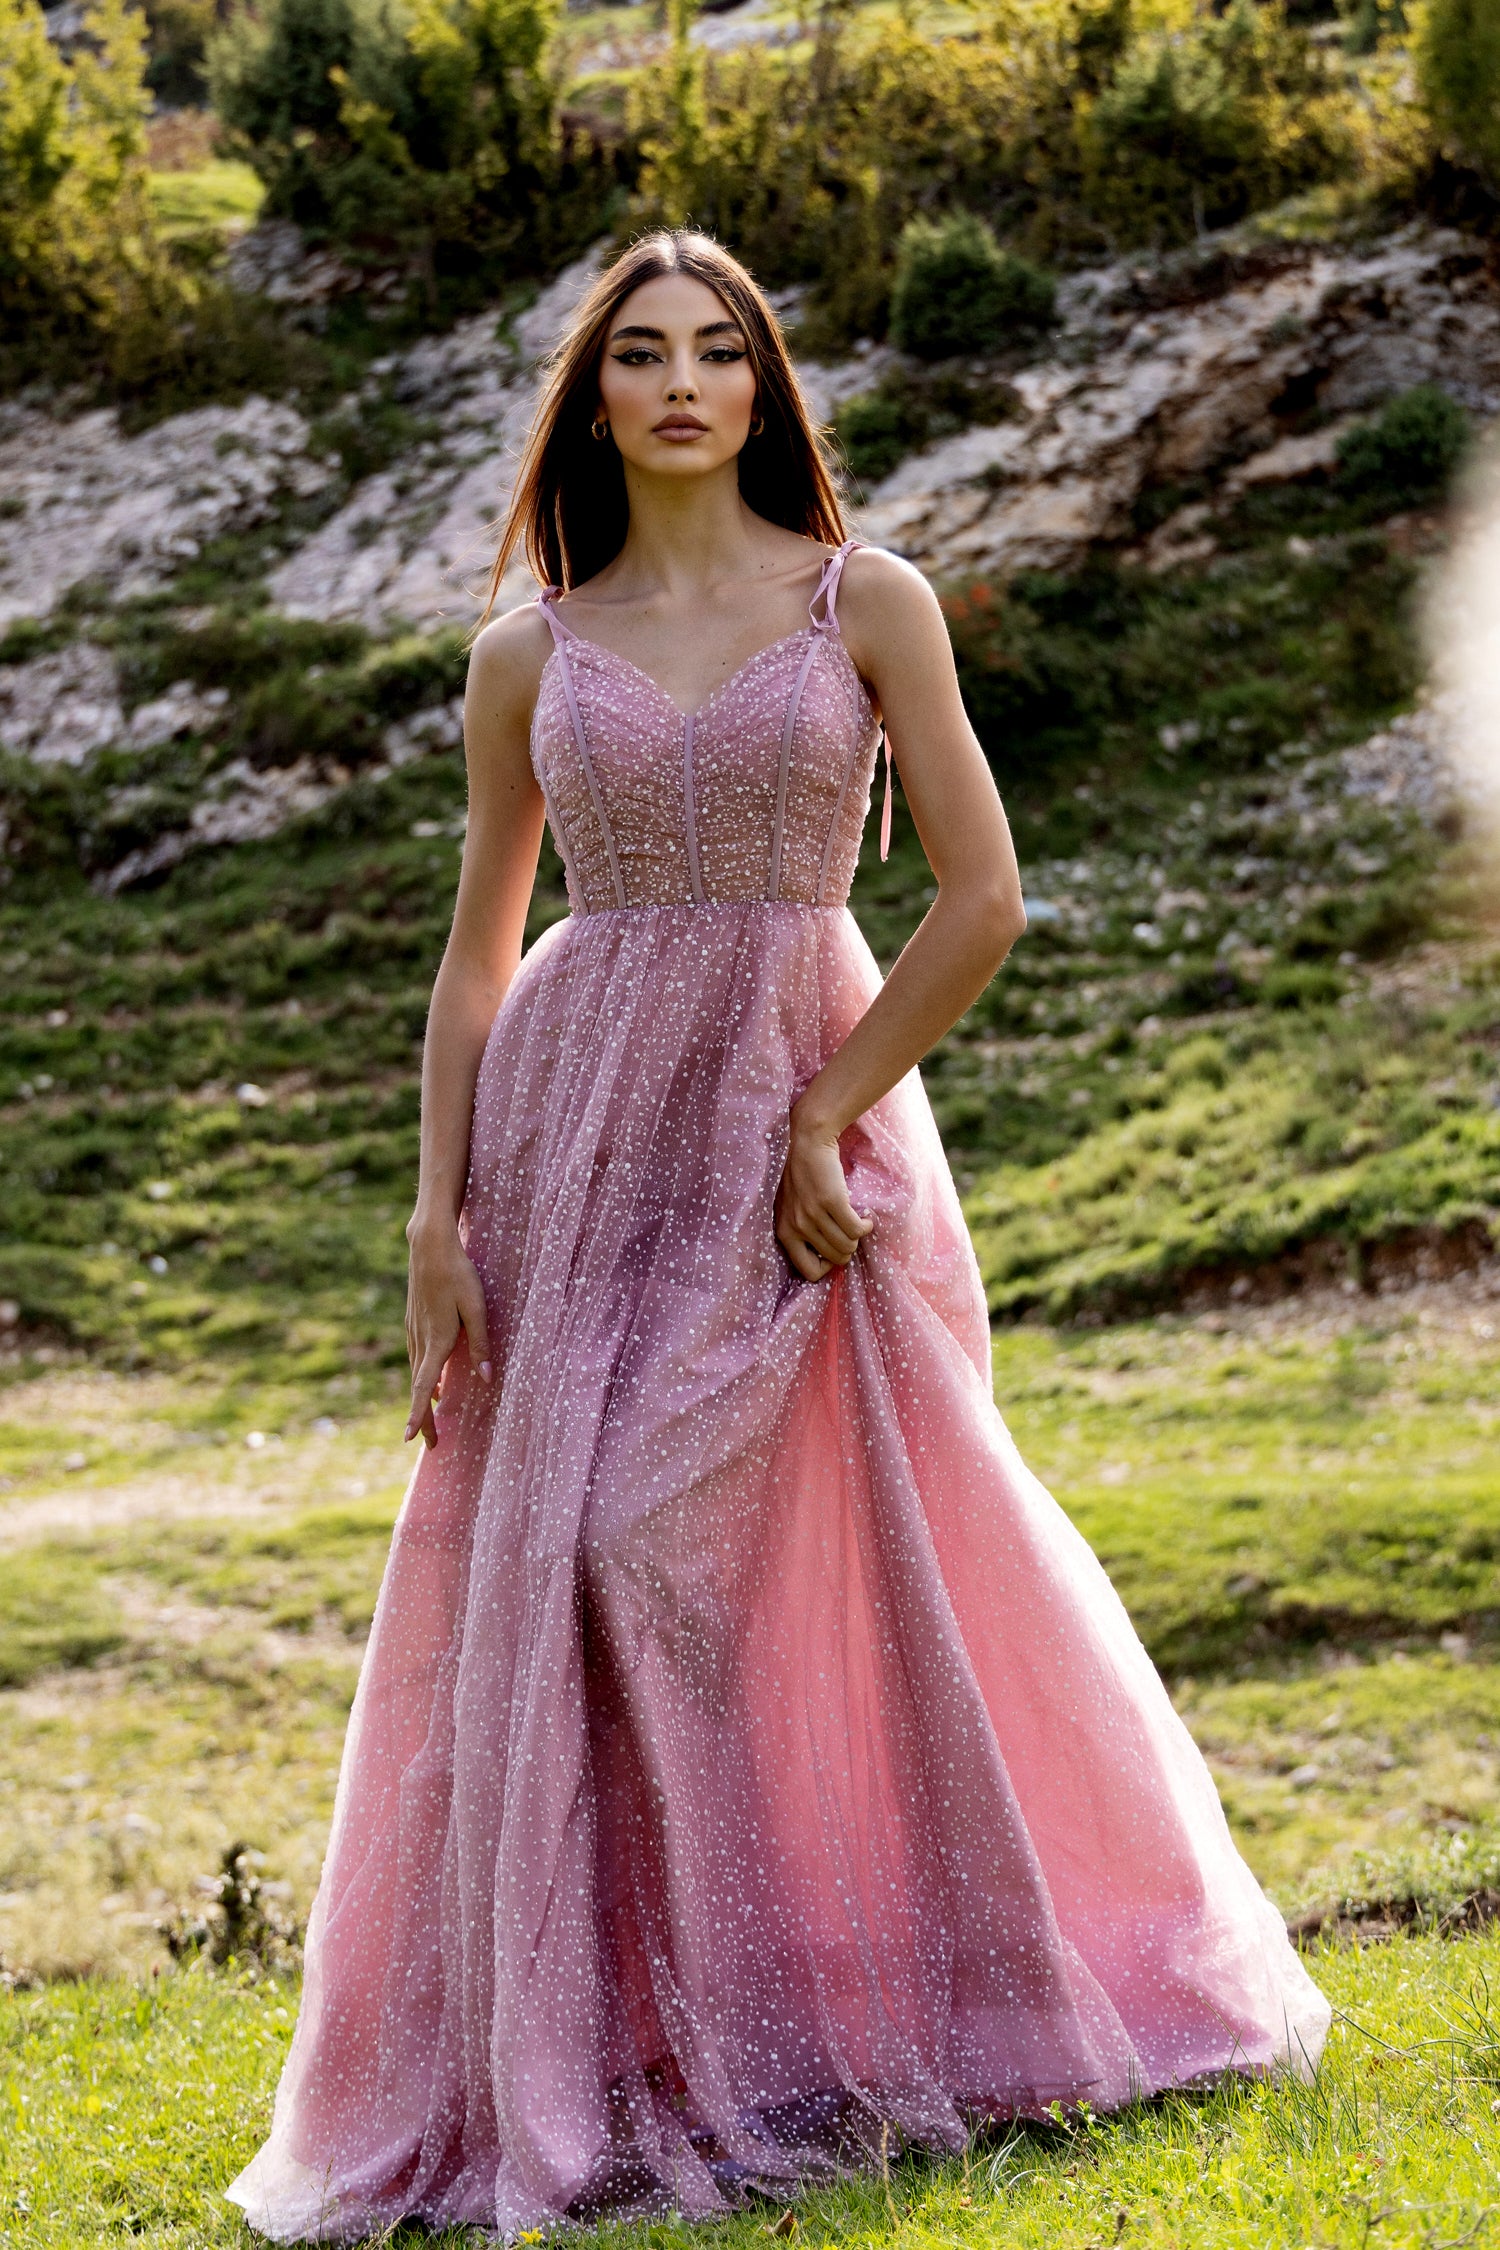 Tina Holly Couture TK311 Tea Rose Sequin Sweetheart Neck Line With An A-Line Skirt Formal Dress